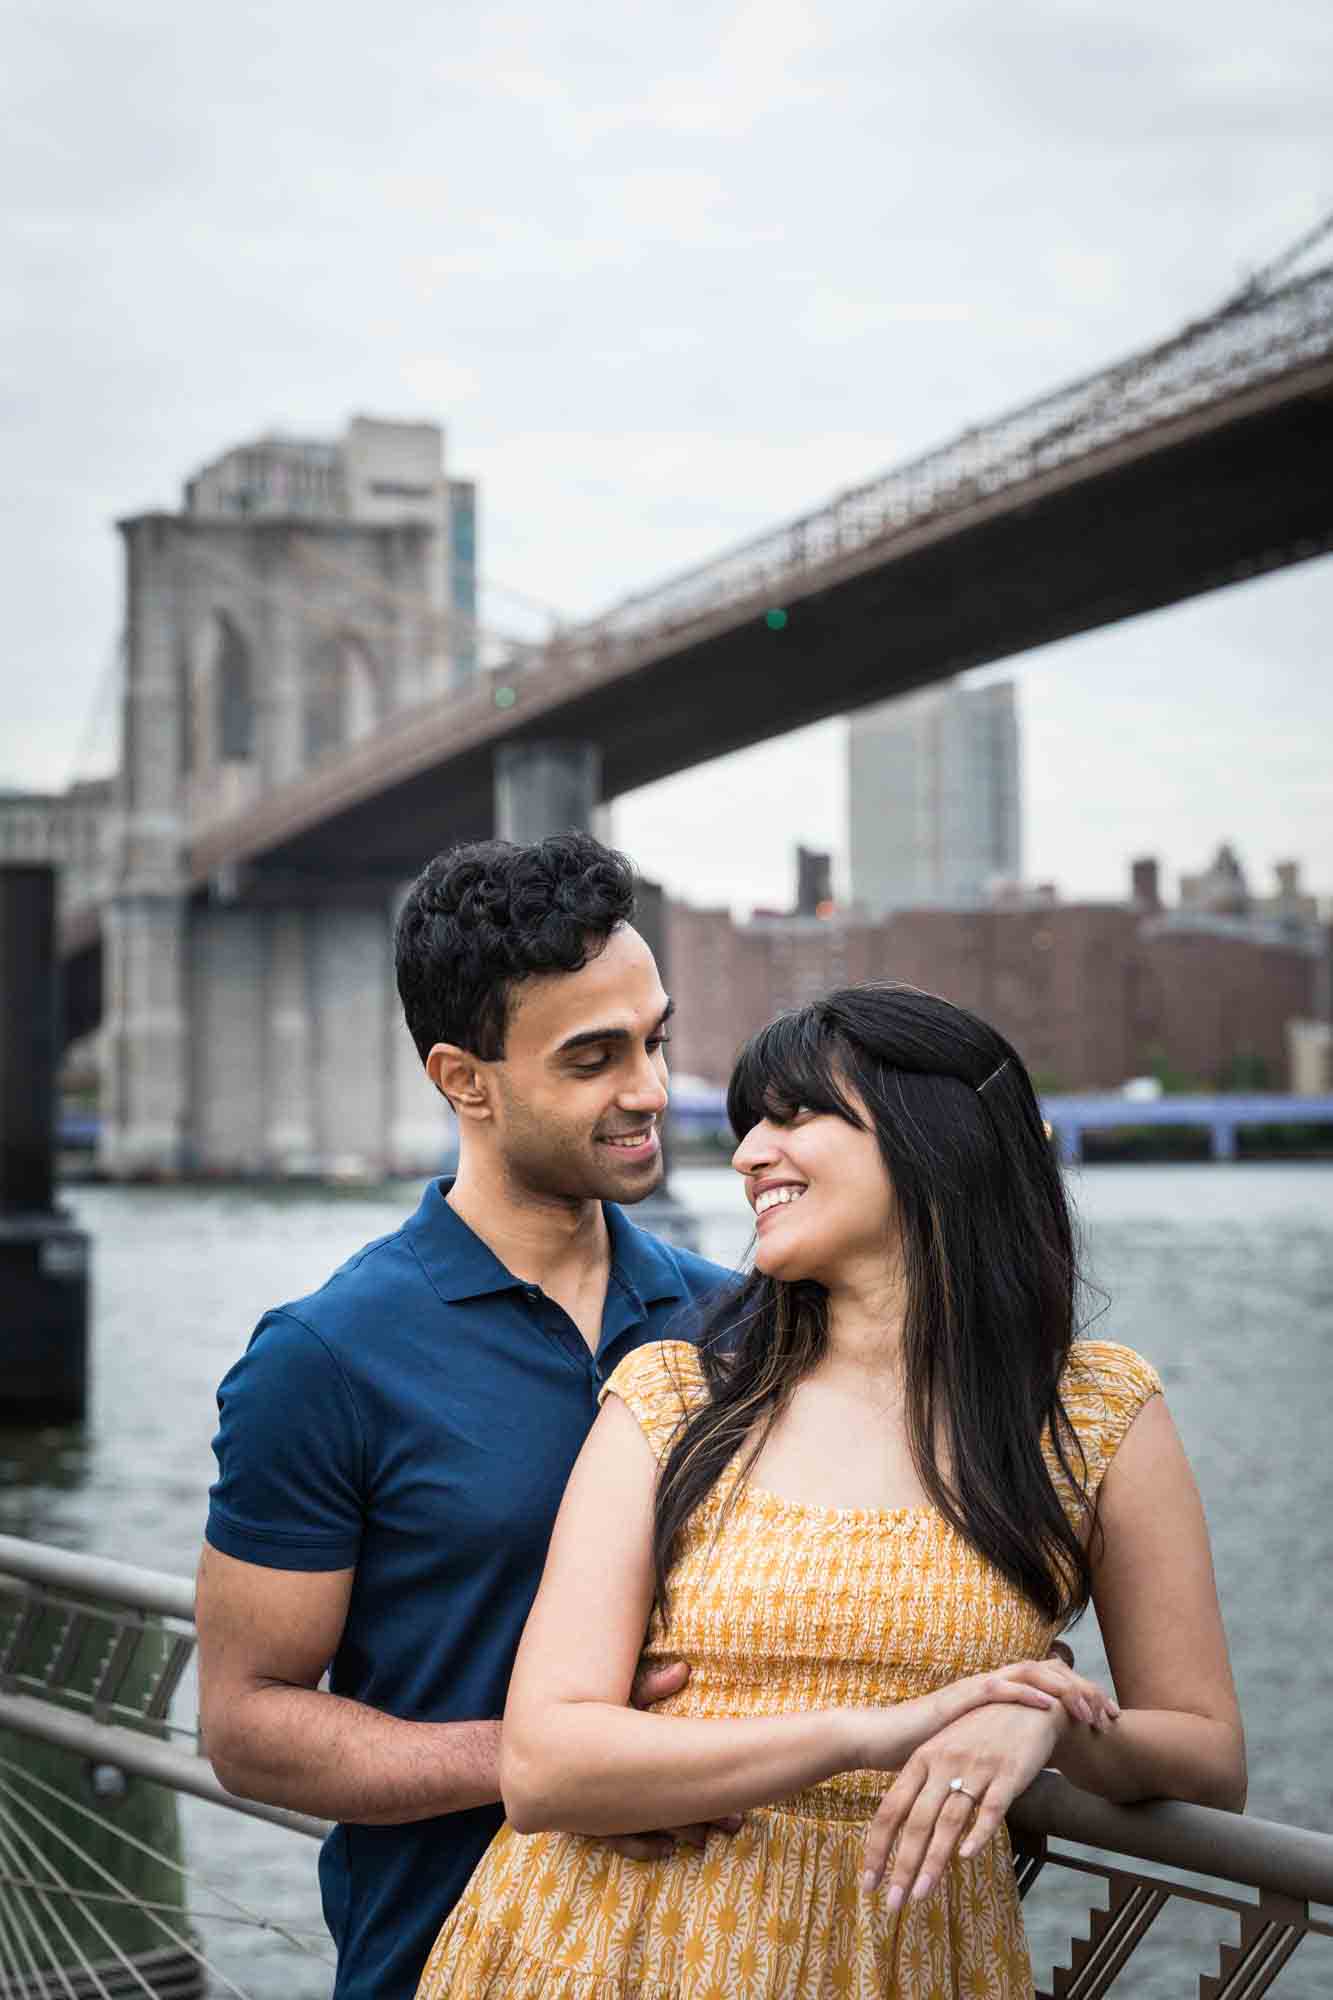 Woman in yellow dress and man in blue shirt standing together in front of Brooklyn Bridge